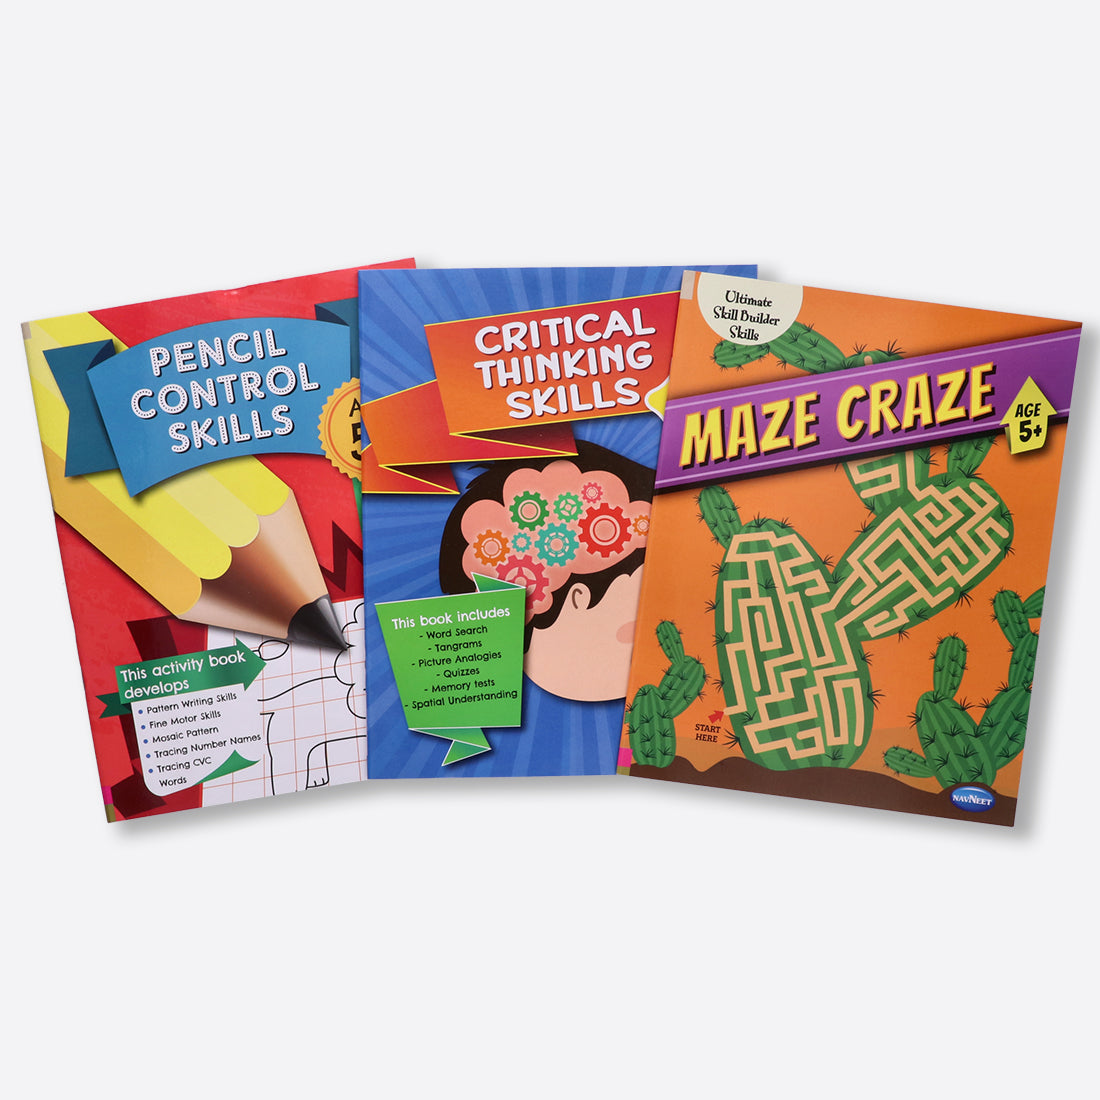 Navneet Pencil Control, Maze & Critical Thinking Activity Books for 5 Year & Above Kids- 3 Books- More than 90 activities- Practice Pattern Writing- Fun Skill Based books